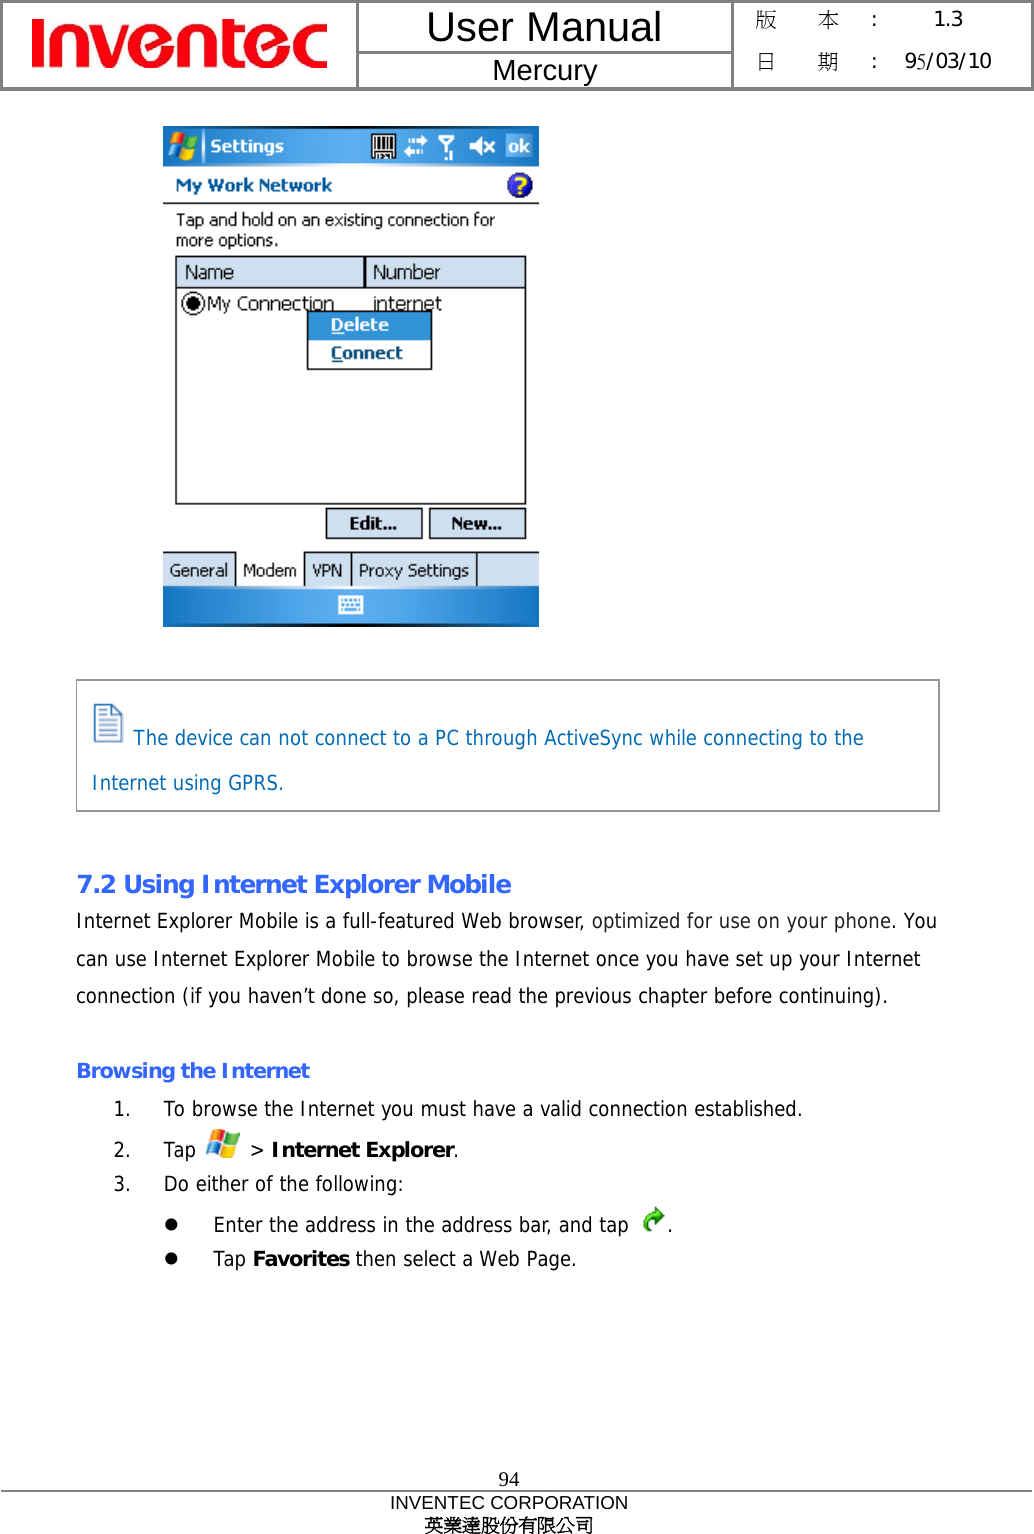 User Manual  Mercury 版    本 :  1.3 日    期 : 95/03/10  94 INVENTEC CORPORATION 英業達股份有限公司         7.2 Using Internet Explorer Mobile Internet Explorer Mobile is a full-featured Web browser, optimized for use on your phone. You can use Internet Explorer Mobile to browse the Internet once you have set up your Internet connection (if you haven’t done so, please read the previous chapter before continuing).  Browsing the Internet 1.  To browse the Internet you must have a valid connection established. 2. Tap   &gt; Internet Explorer. 3.  Do either of the following:   Enter the address in the address bar, and tap  .   Tap Favorites then select a Web Page.    The device can not connect to a PC through ActiveSync while connecting to the Internet using GPRS. 